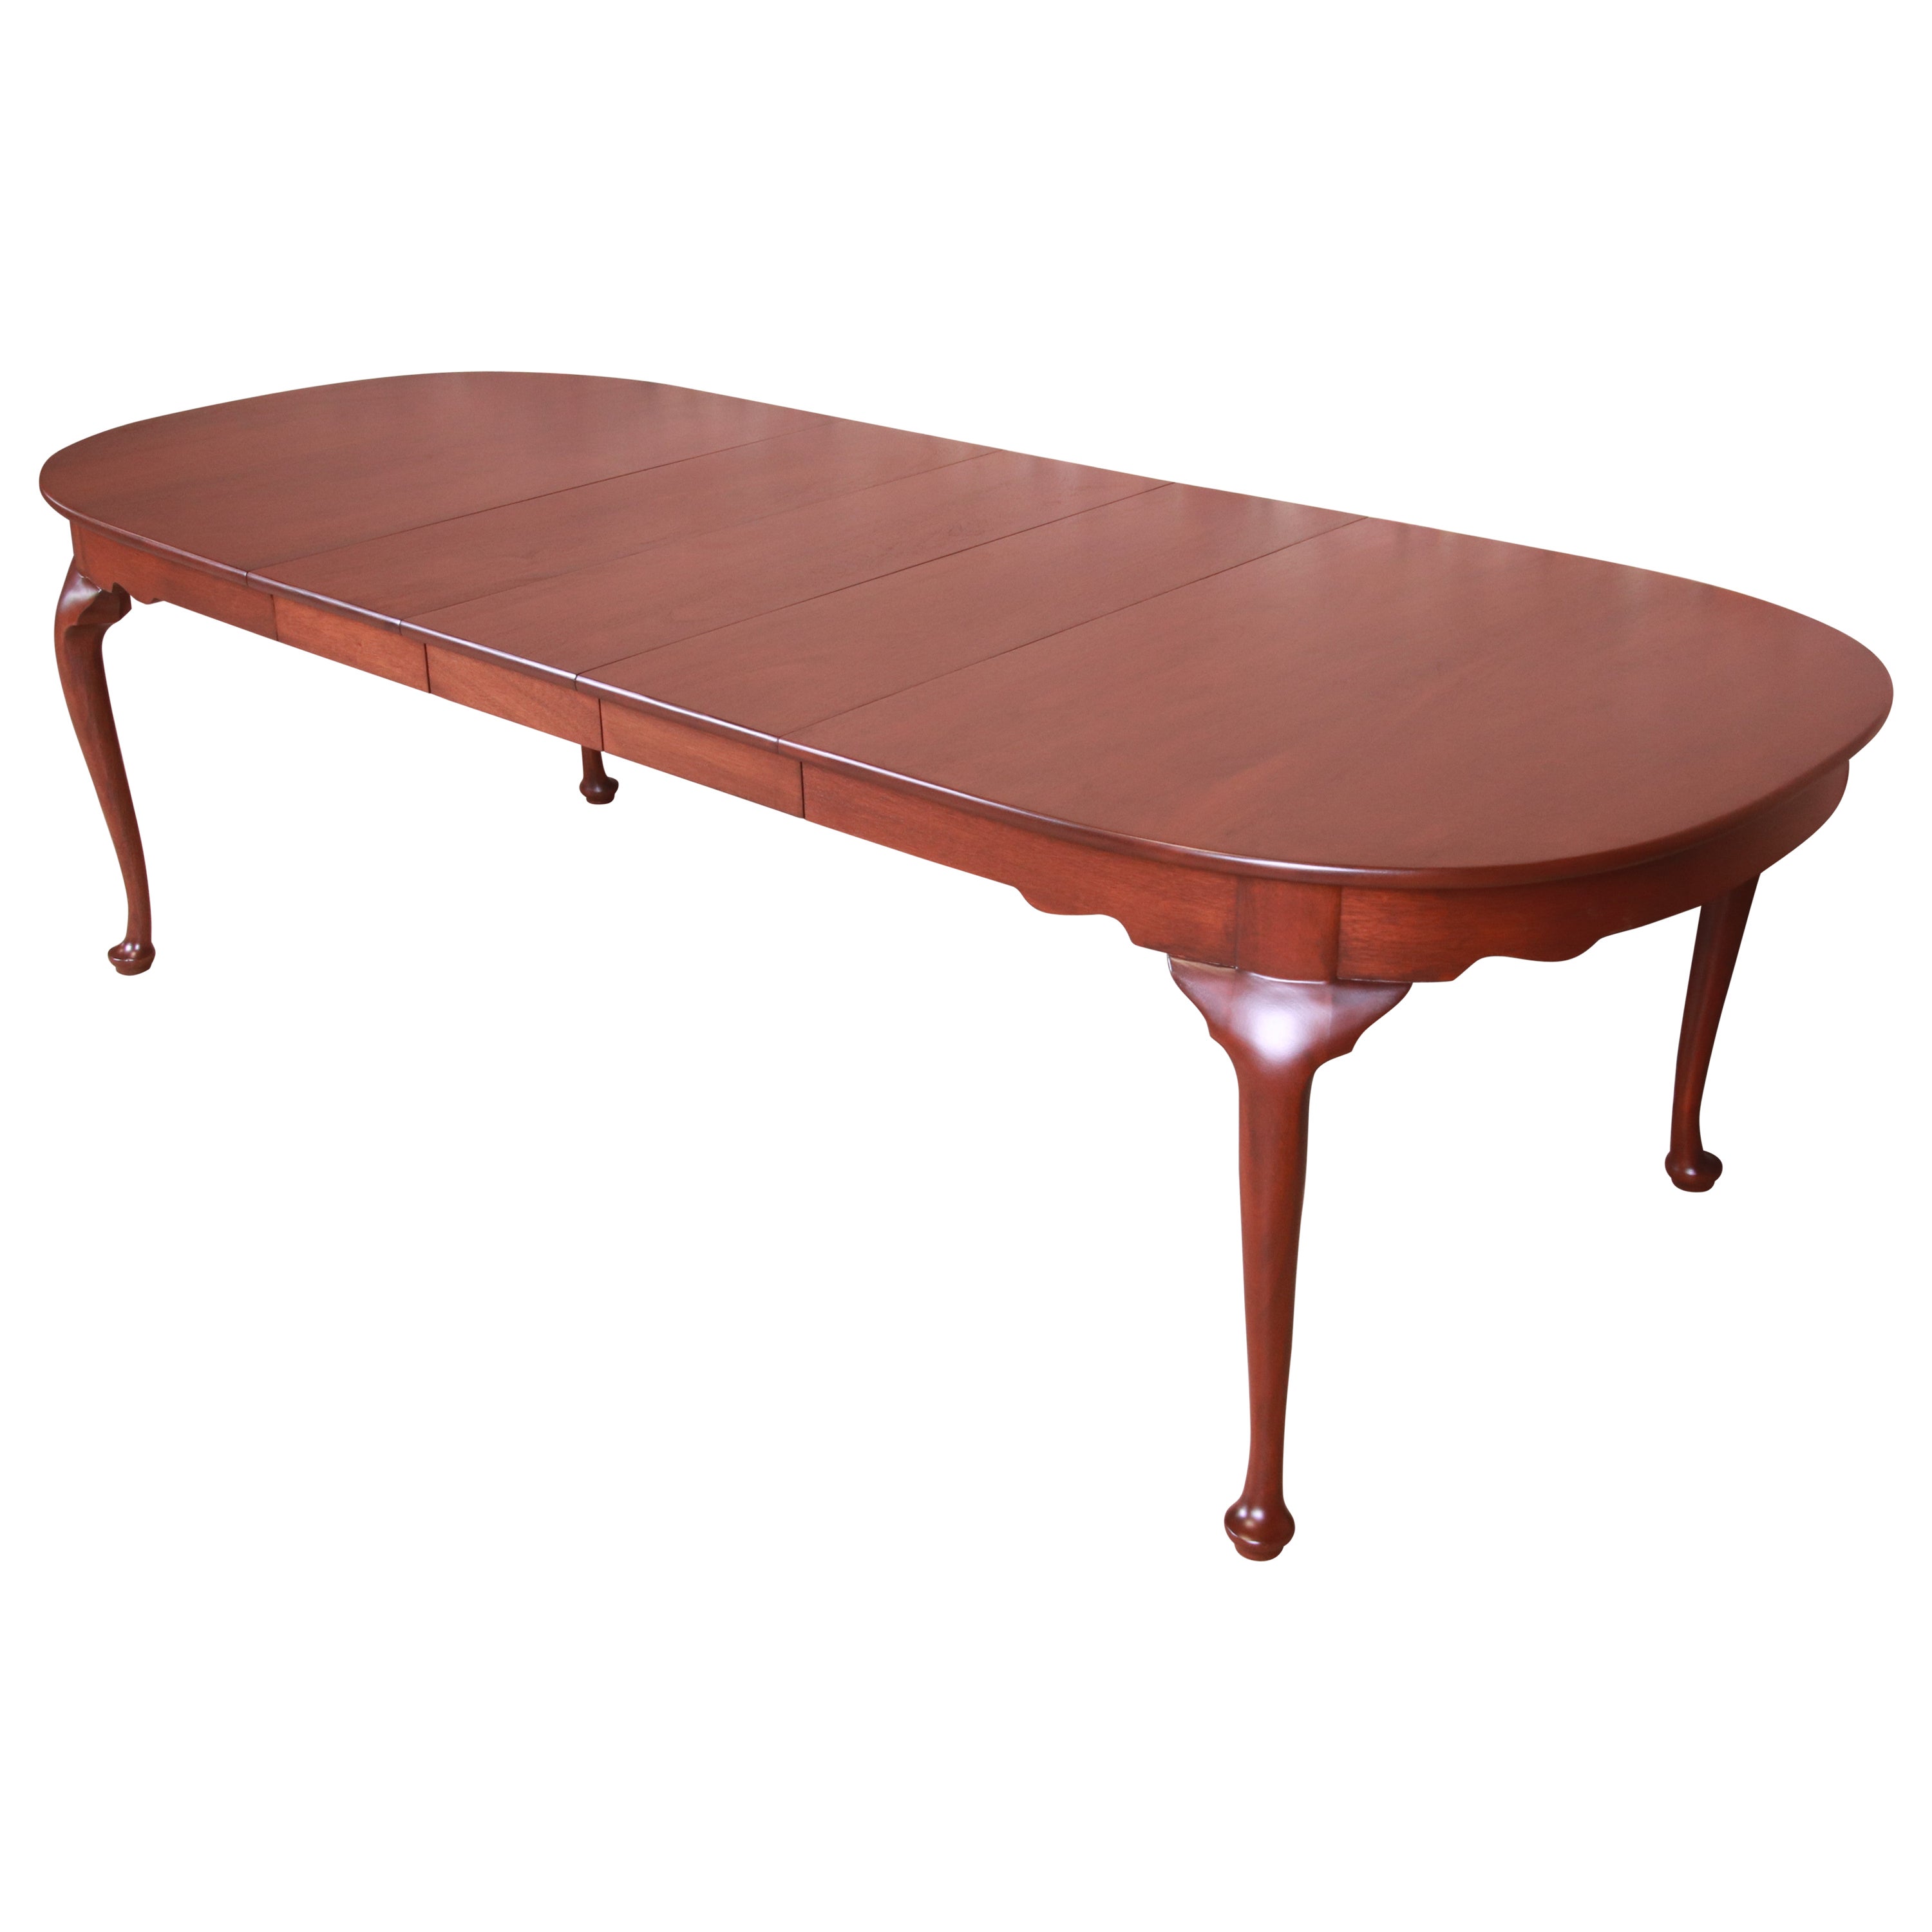 Henkel Harris Queen Anne Solid Mahogany Extension Dining Table, Newly Refinished